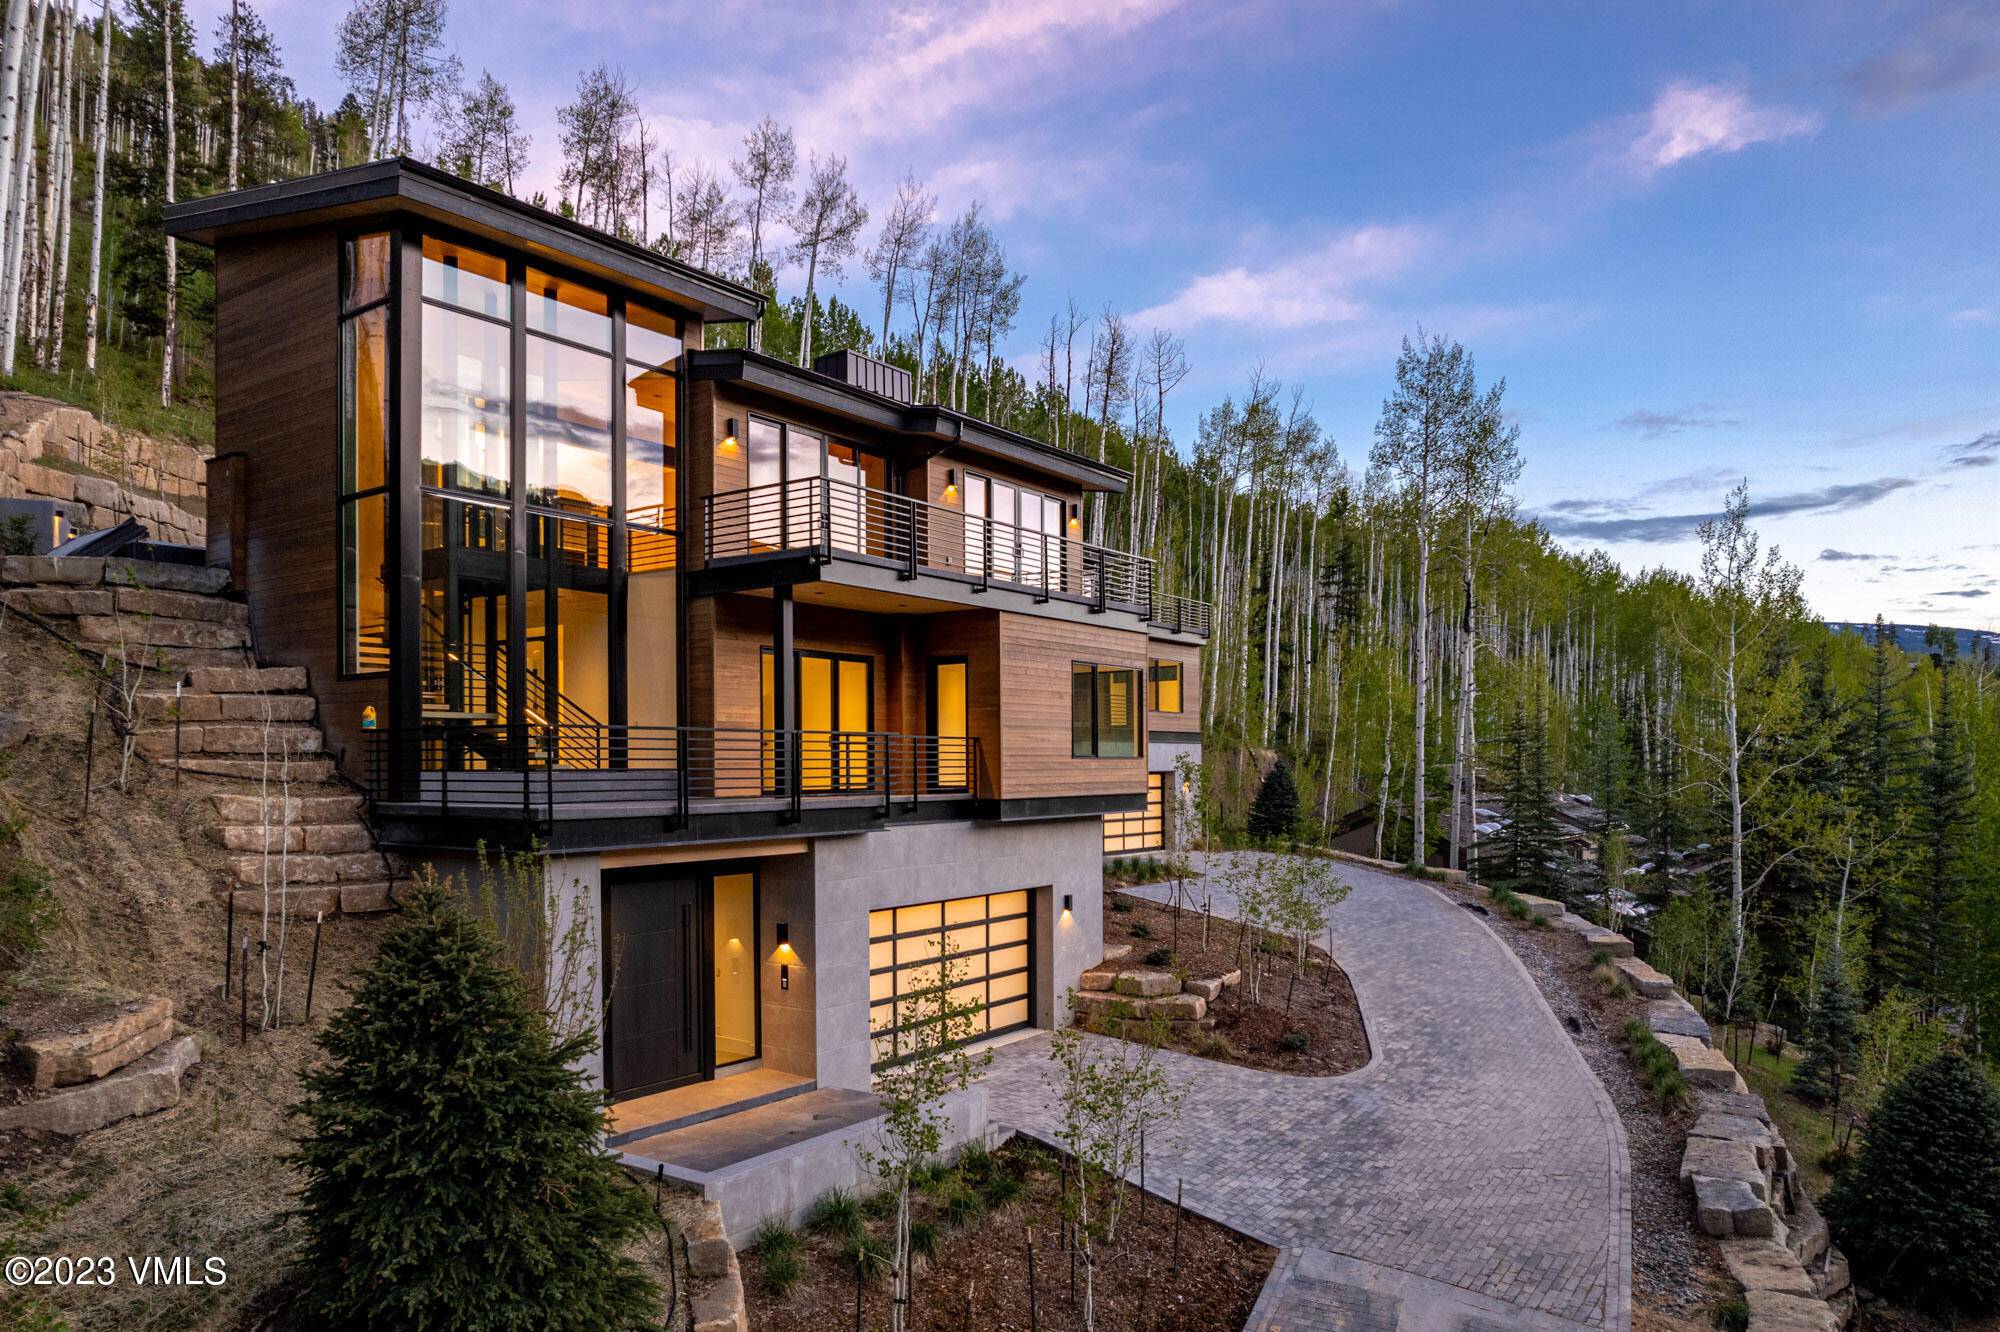 Situated high in the sought after Cascade Village neighborhood, 1469 Greenhill Court East is the secondary side of a new construction mountain modern residence.